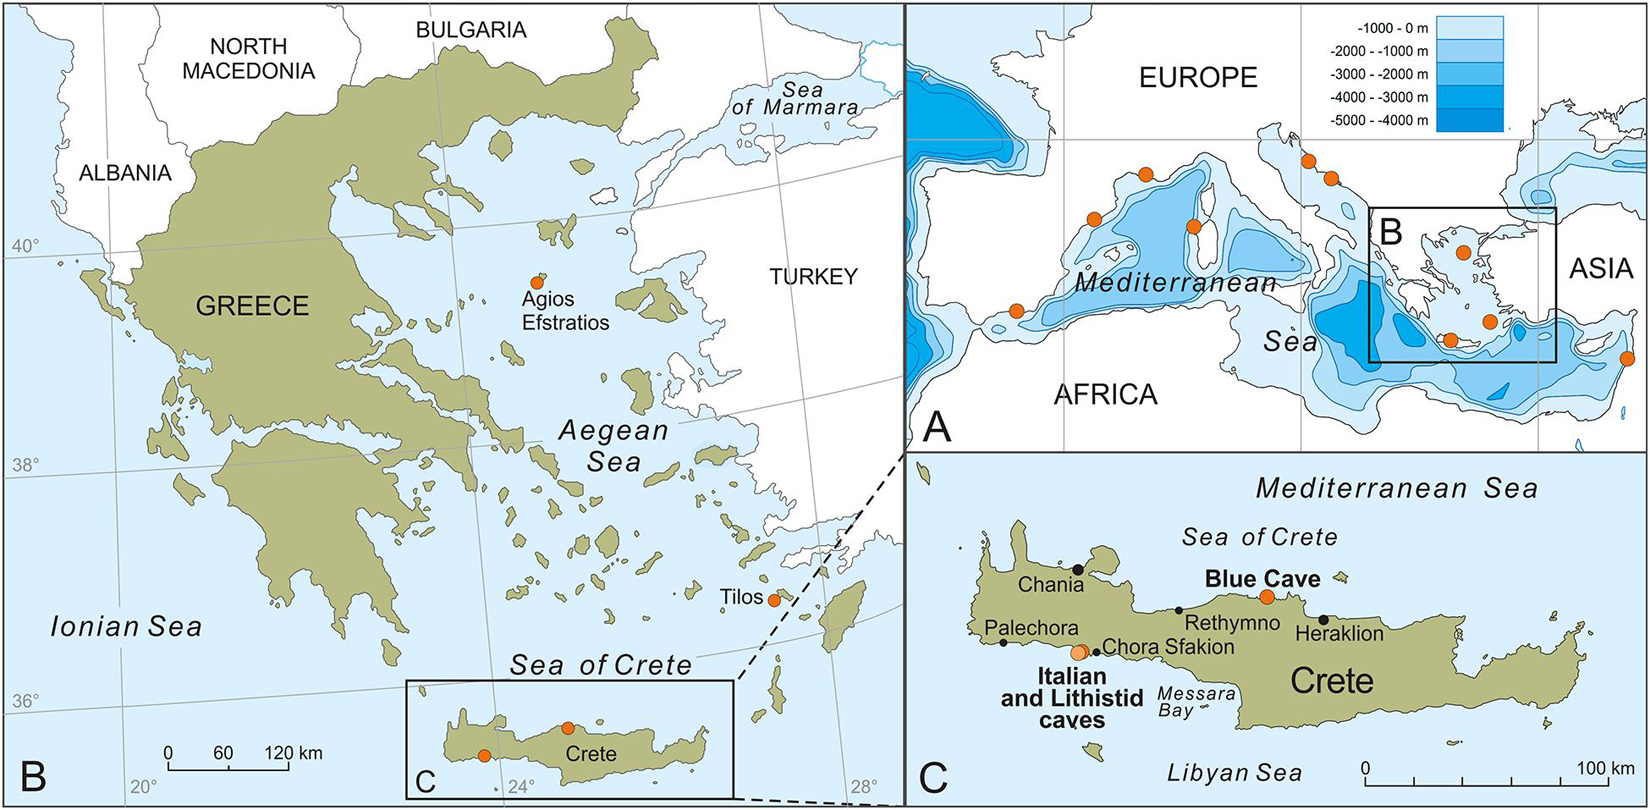 Freshwater influx to the Eastern Mediterranean Sea from the